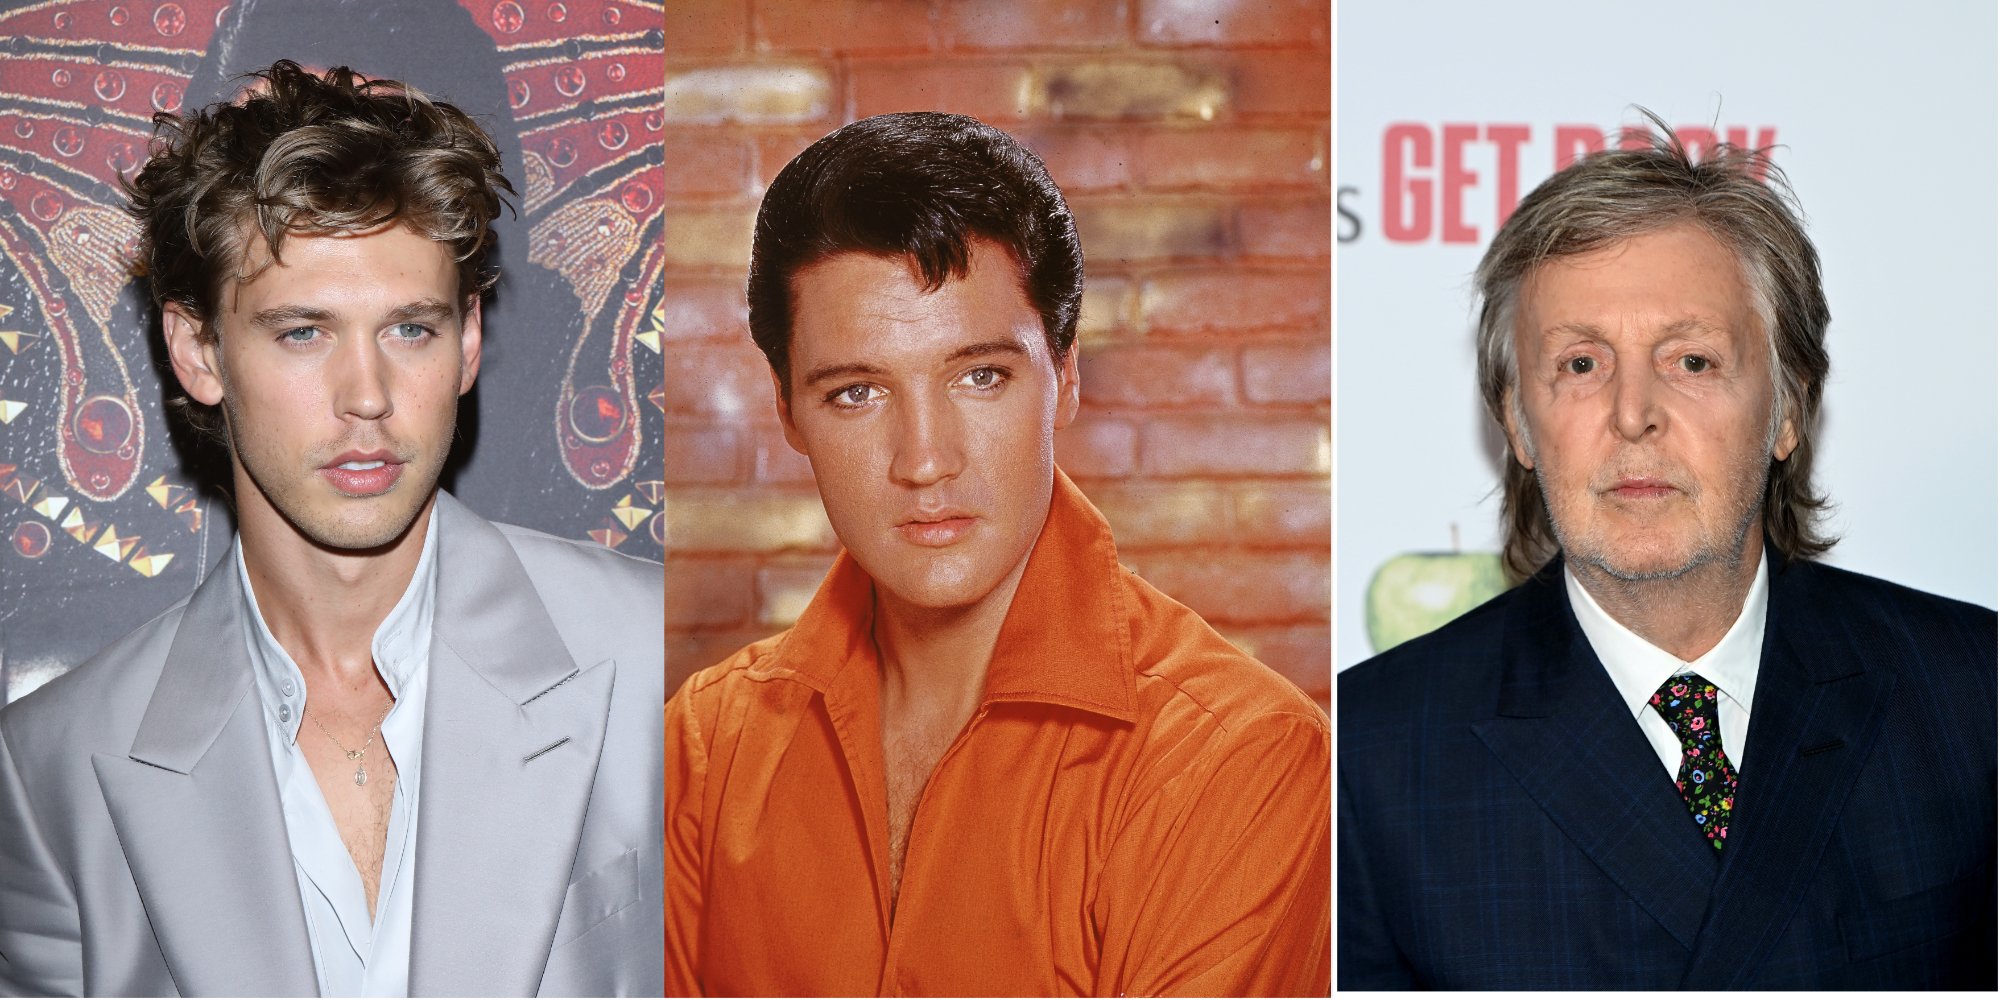 Austin Butler, Elvis Presley and Paul McCartley in side by side photographs.